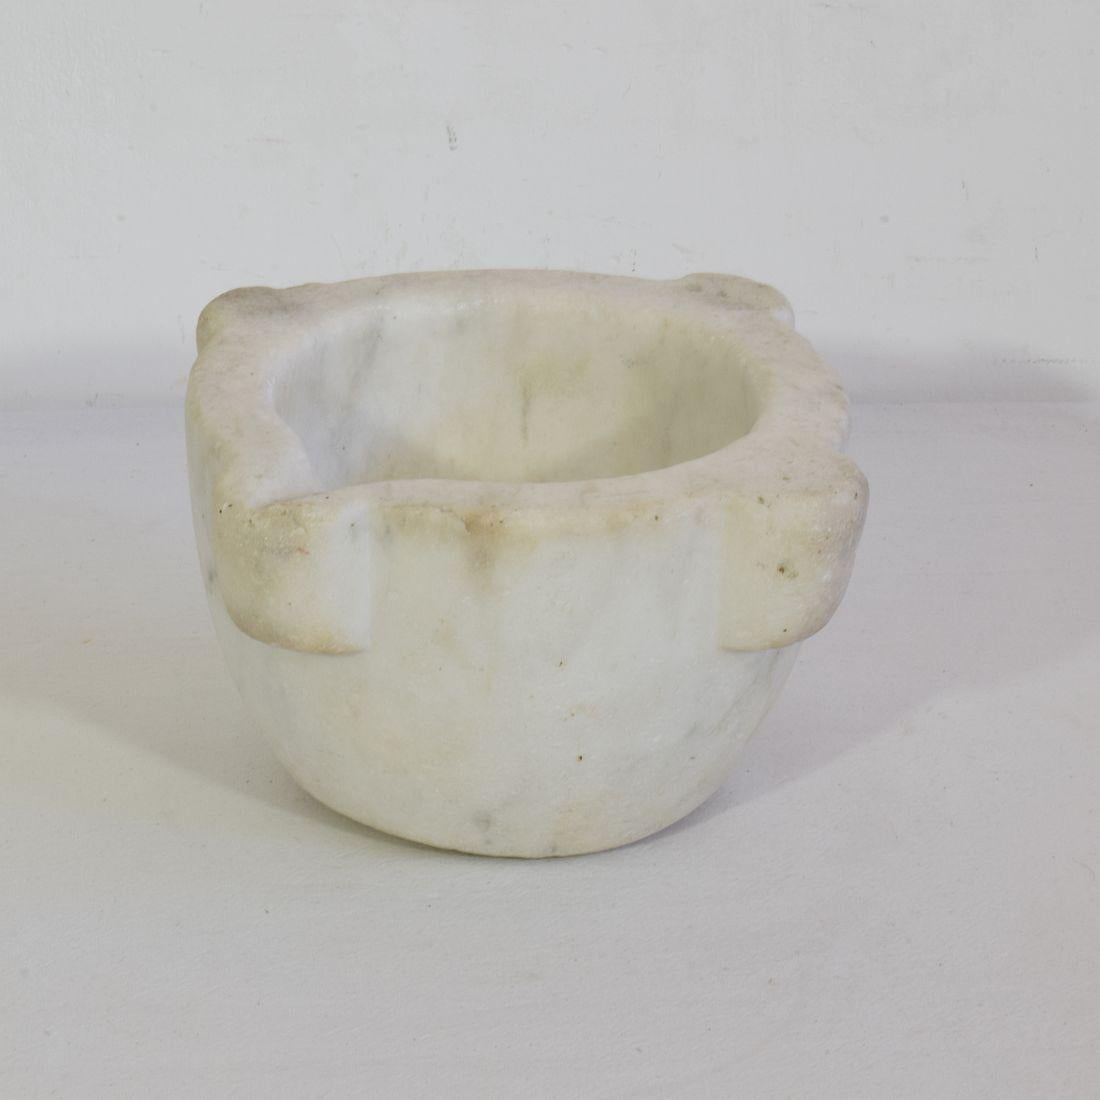 Beautiful white marble mortar, France, 18/19th century.
Weathered.